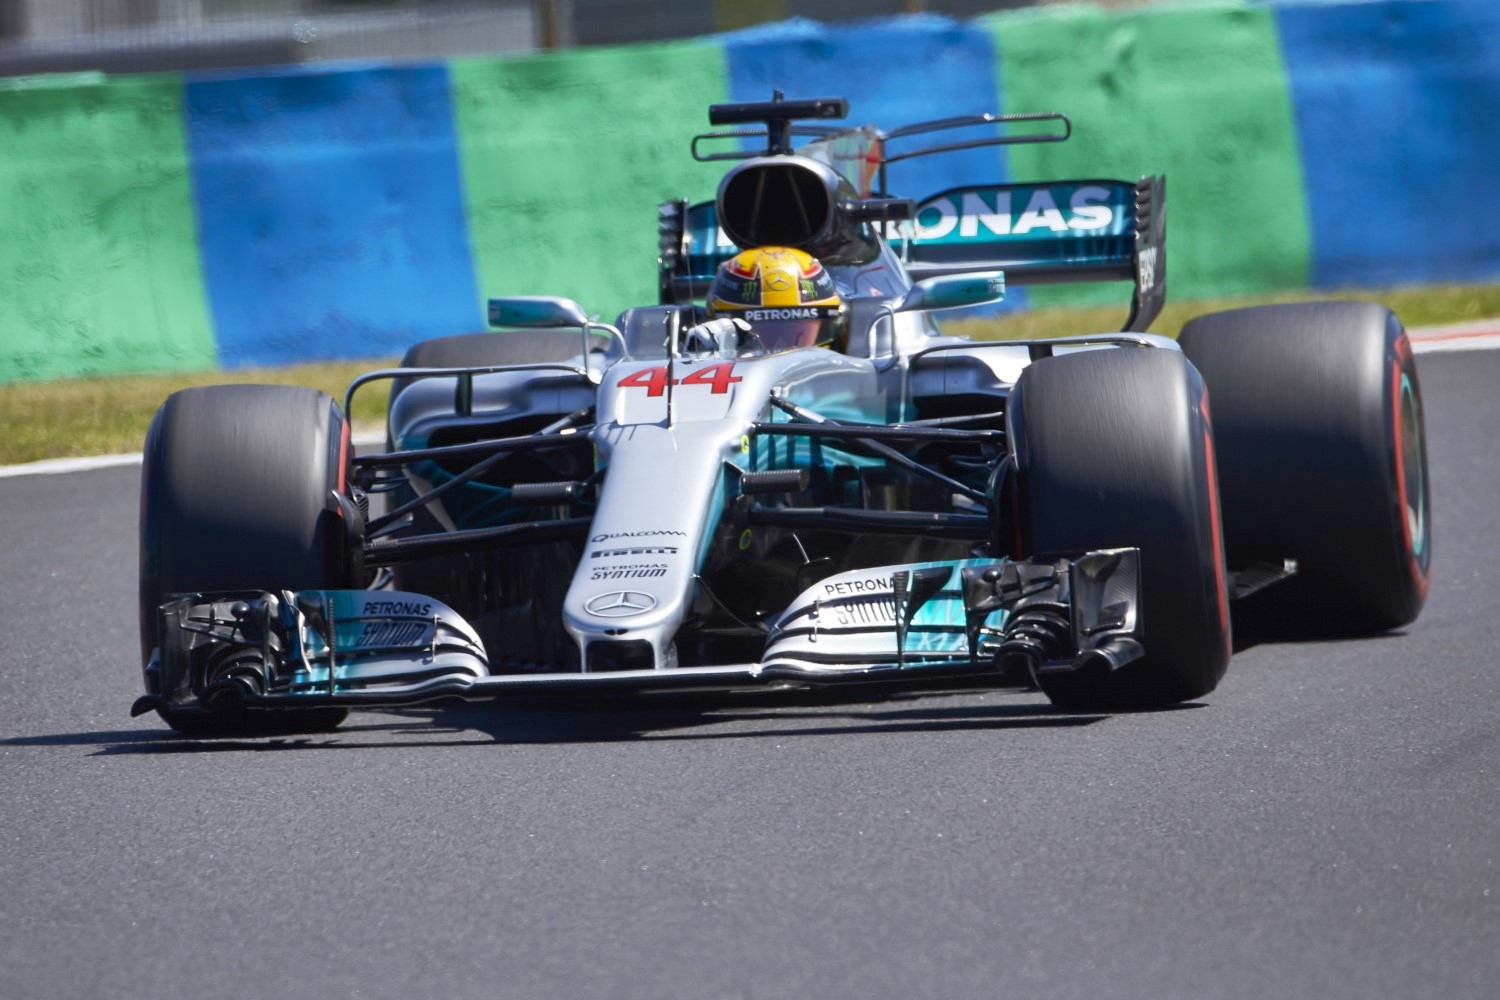 Hamilton was faster than Bottas, so Bottas letting him past had merit, but at the end Bottas was slower and far behind Hamilton, so he did not deserve the repass